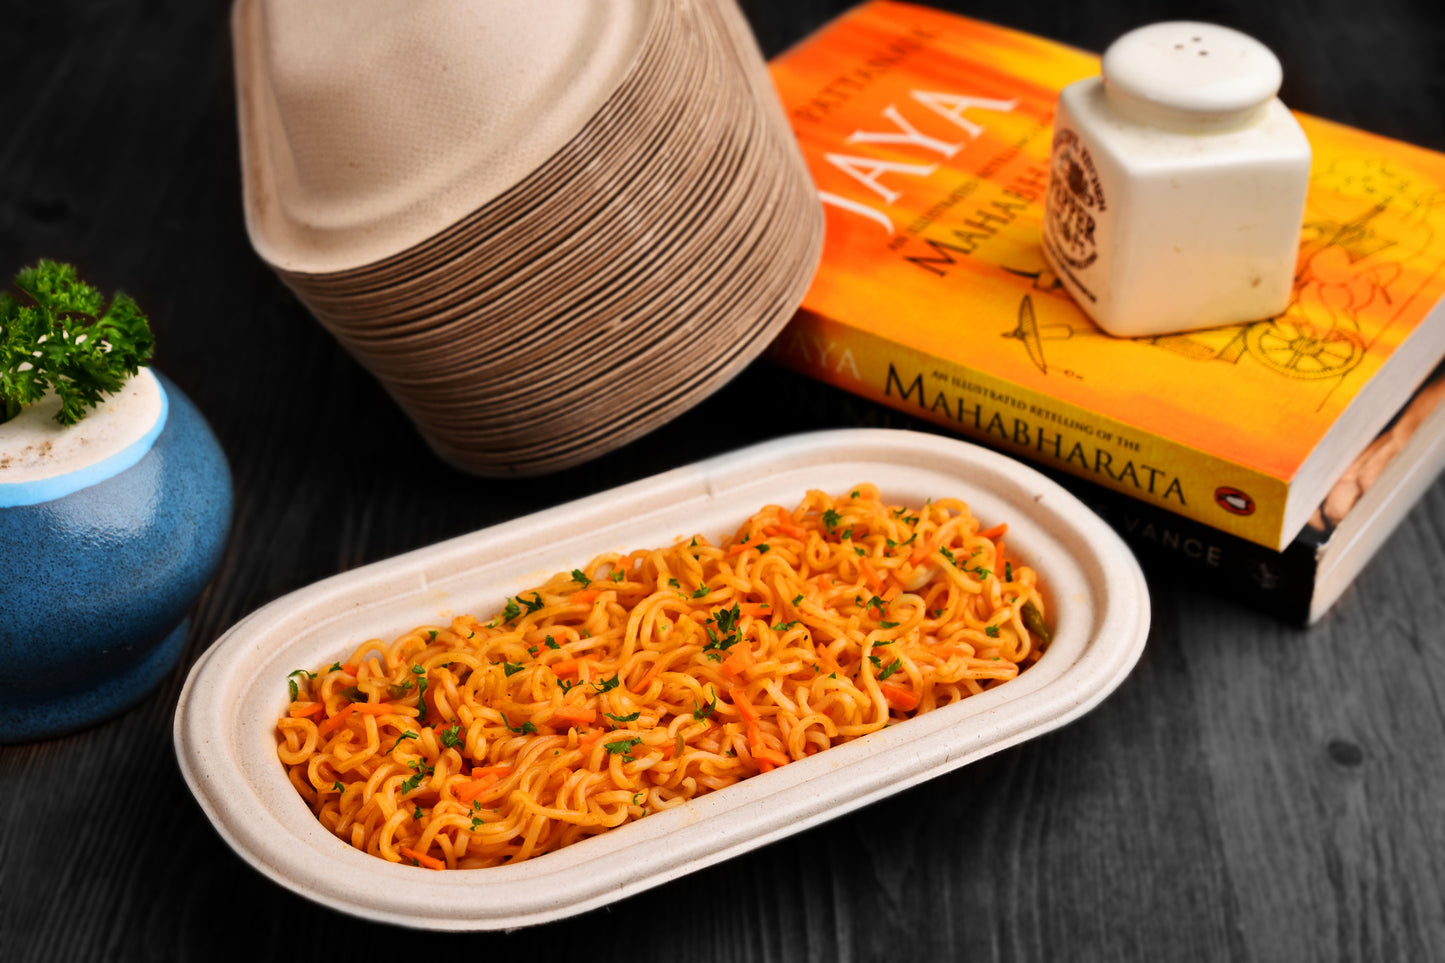 16 oz / 500 ml Dine-in Container